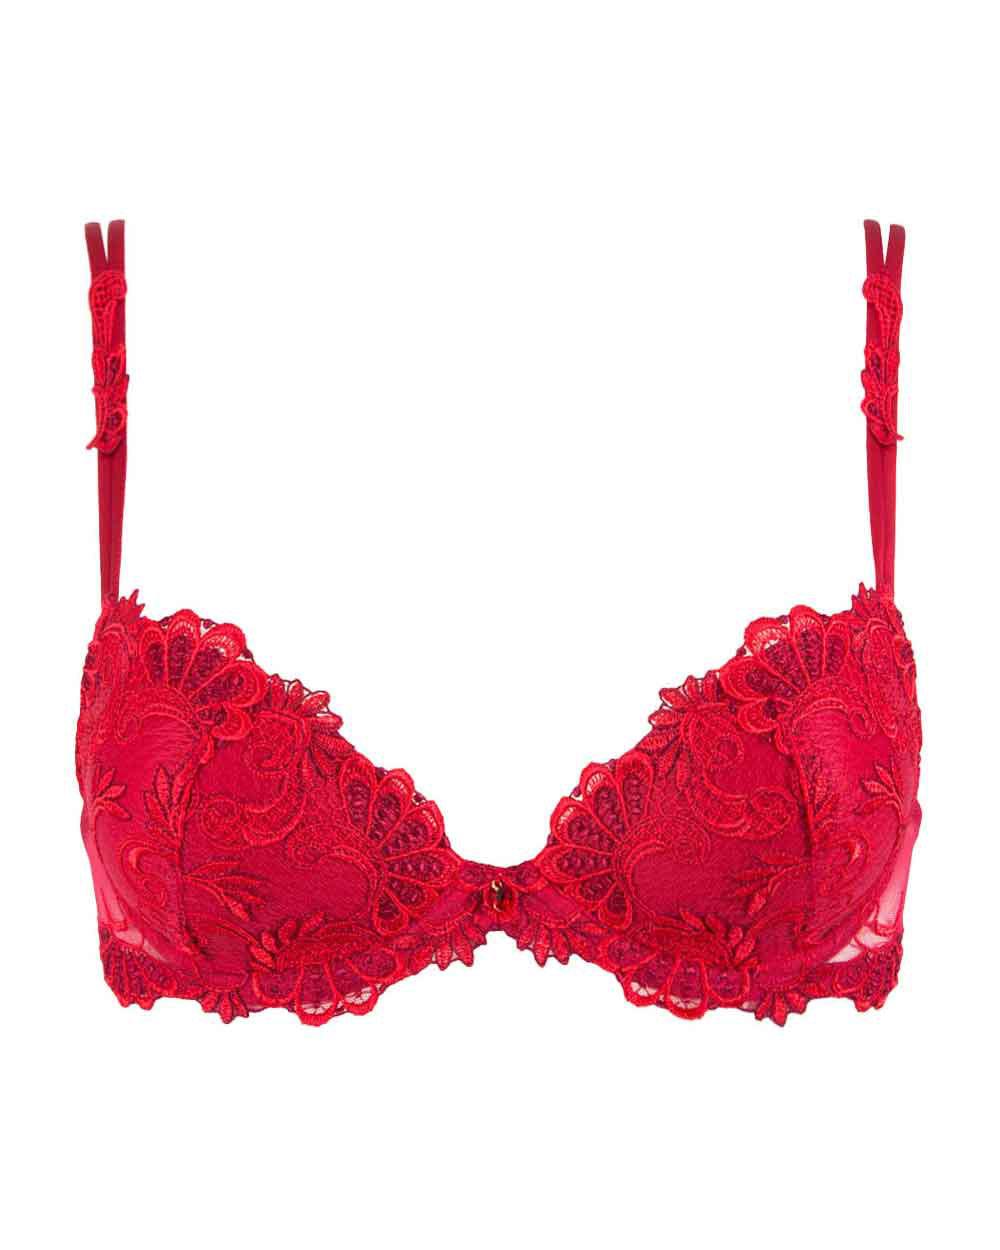 Coral Push up Bra in Stretch Tulle and Leavers Lace – Vantage - Clean